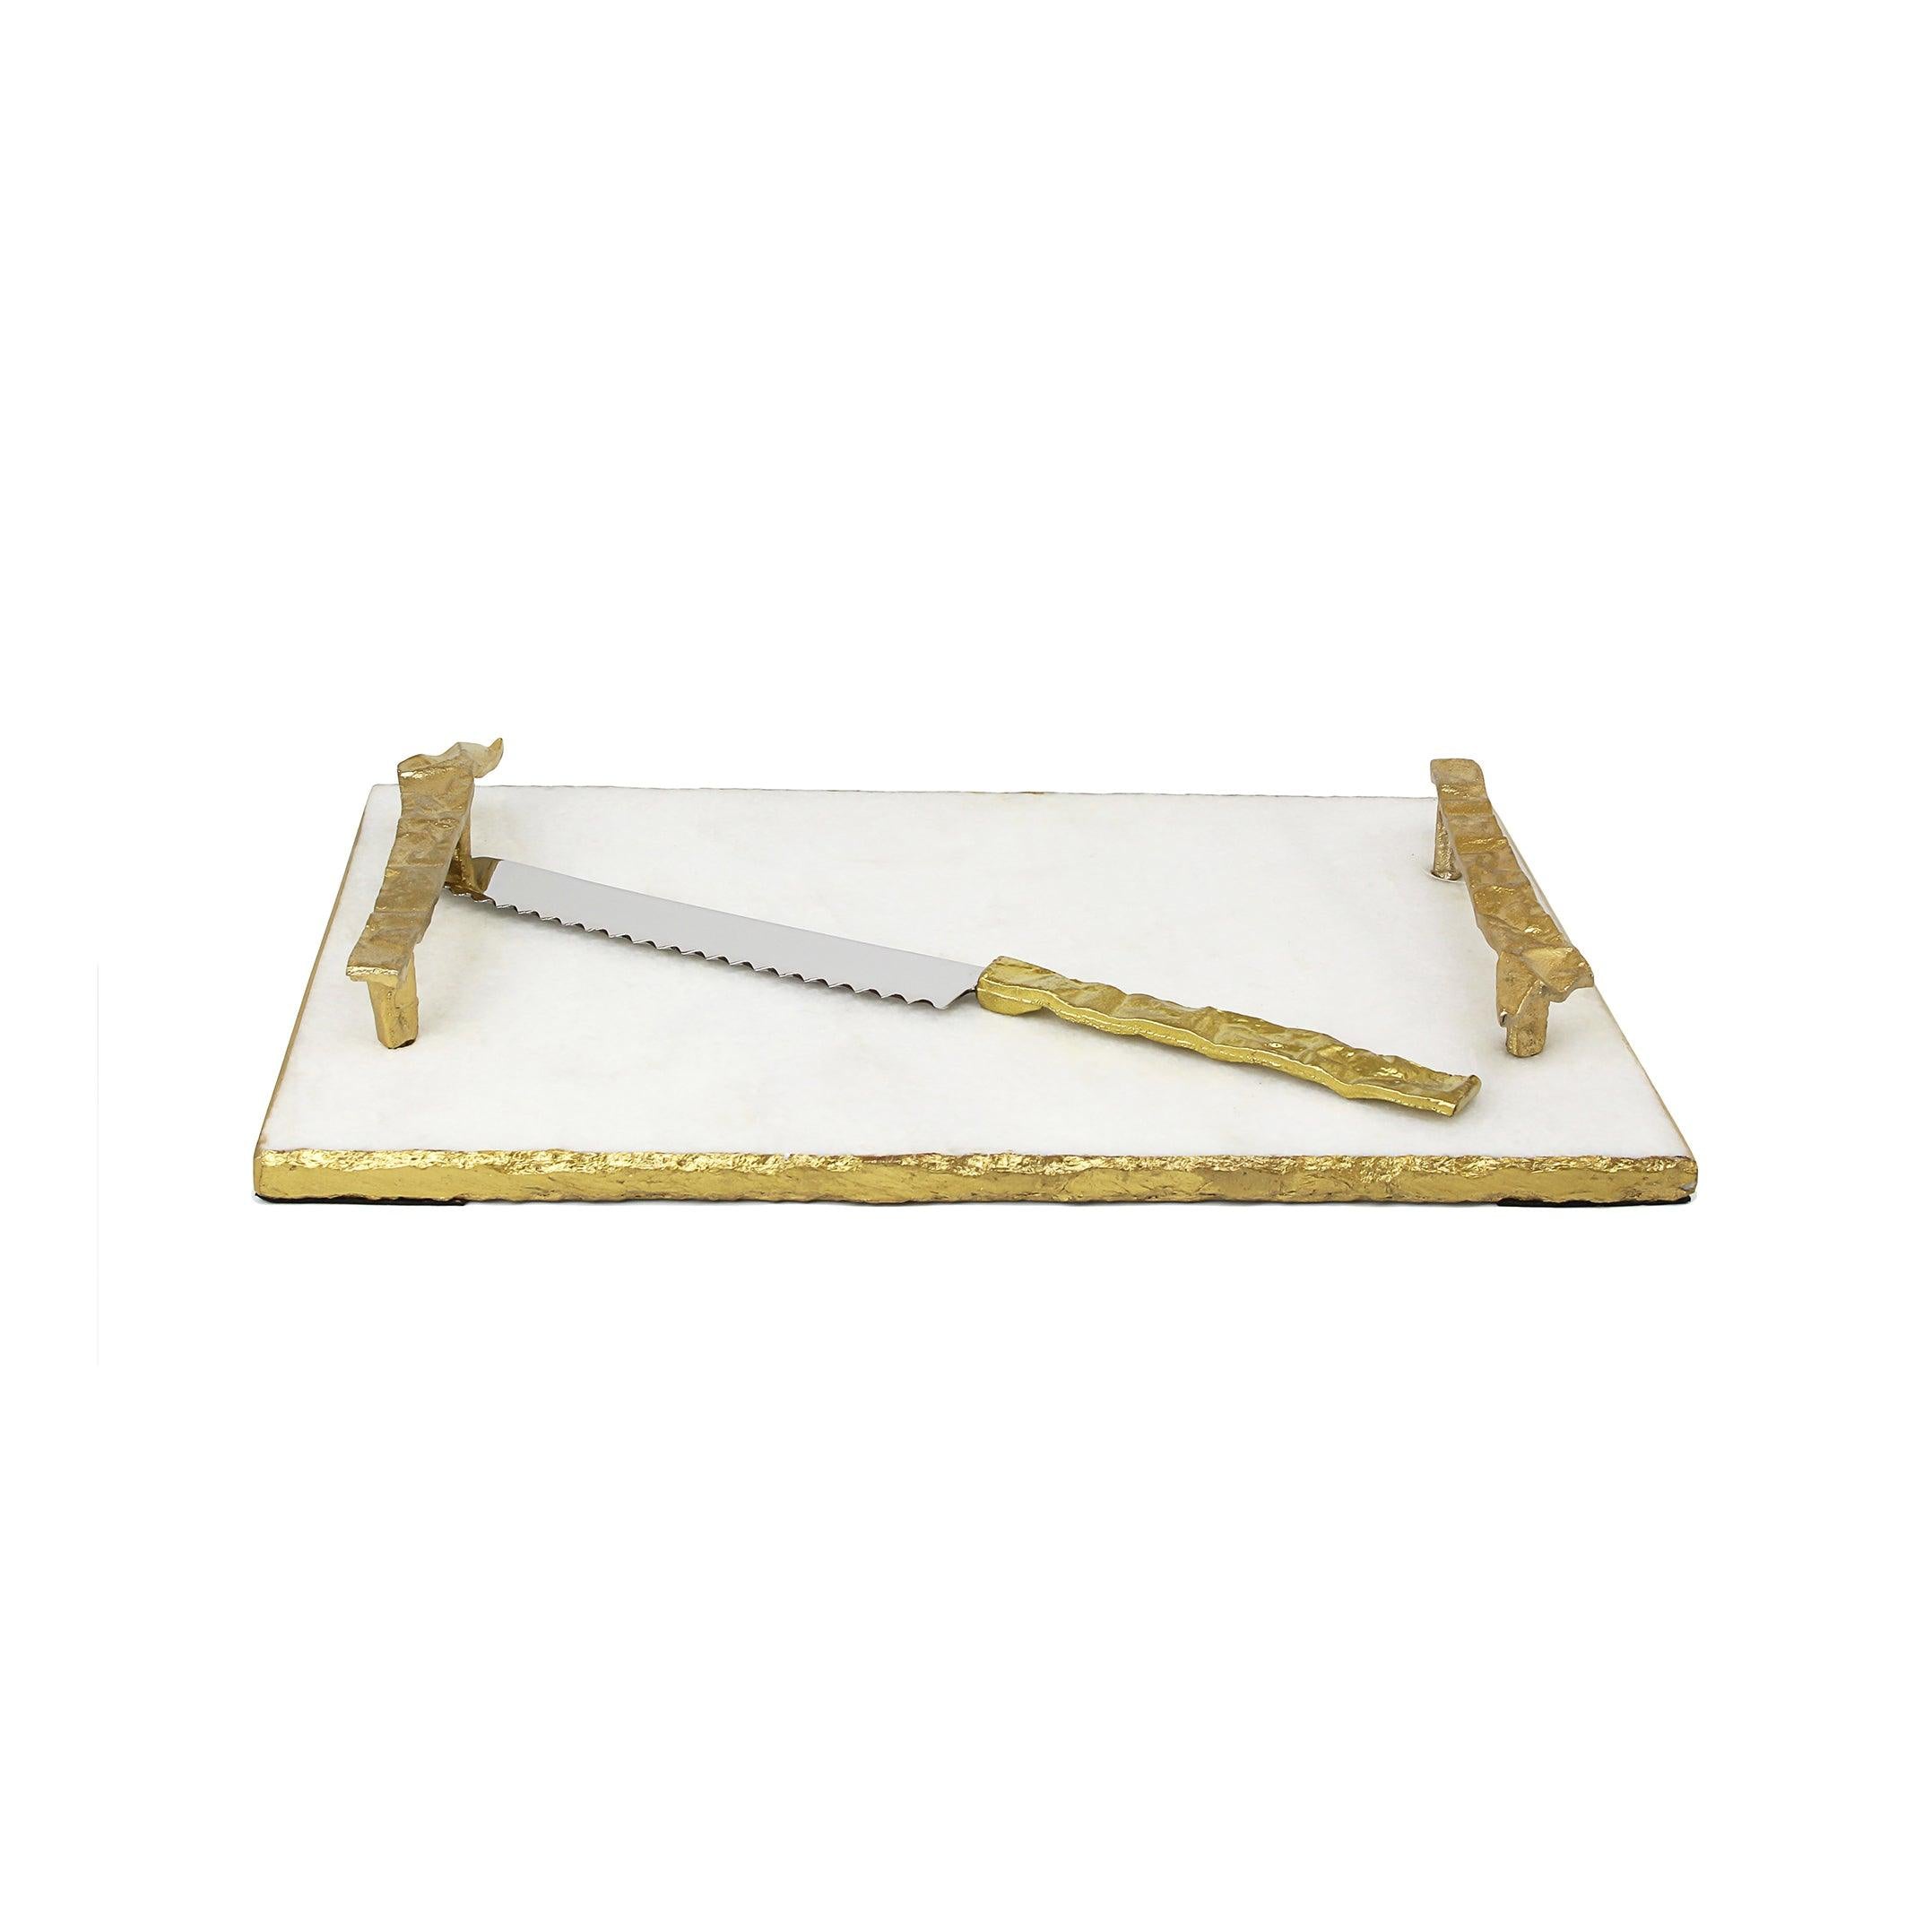 White Marble Challah Tray with Gold Crumbled Handles and Knife - Elegant Linen